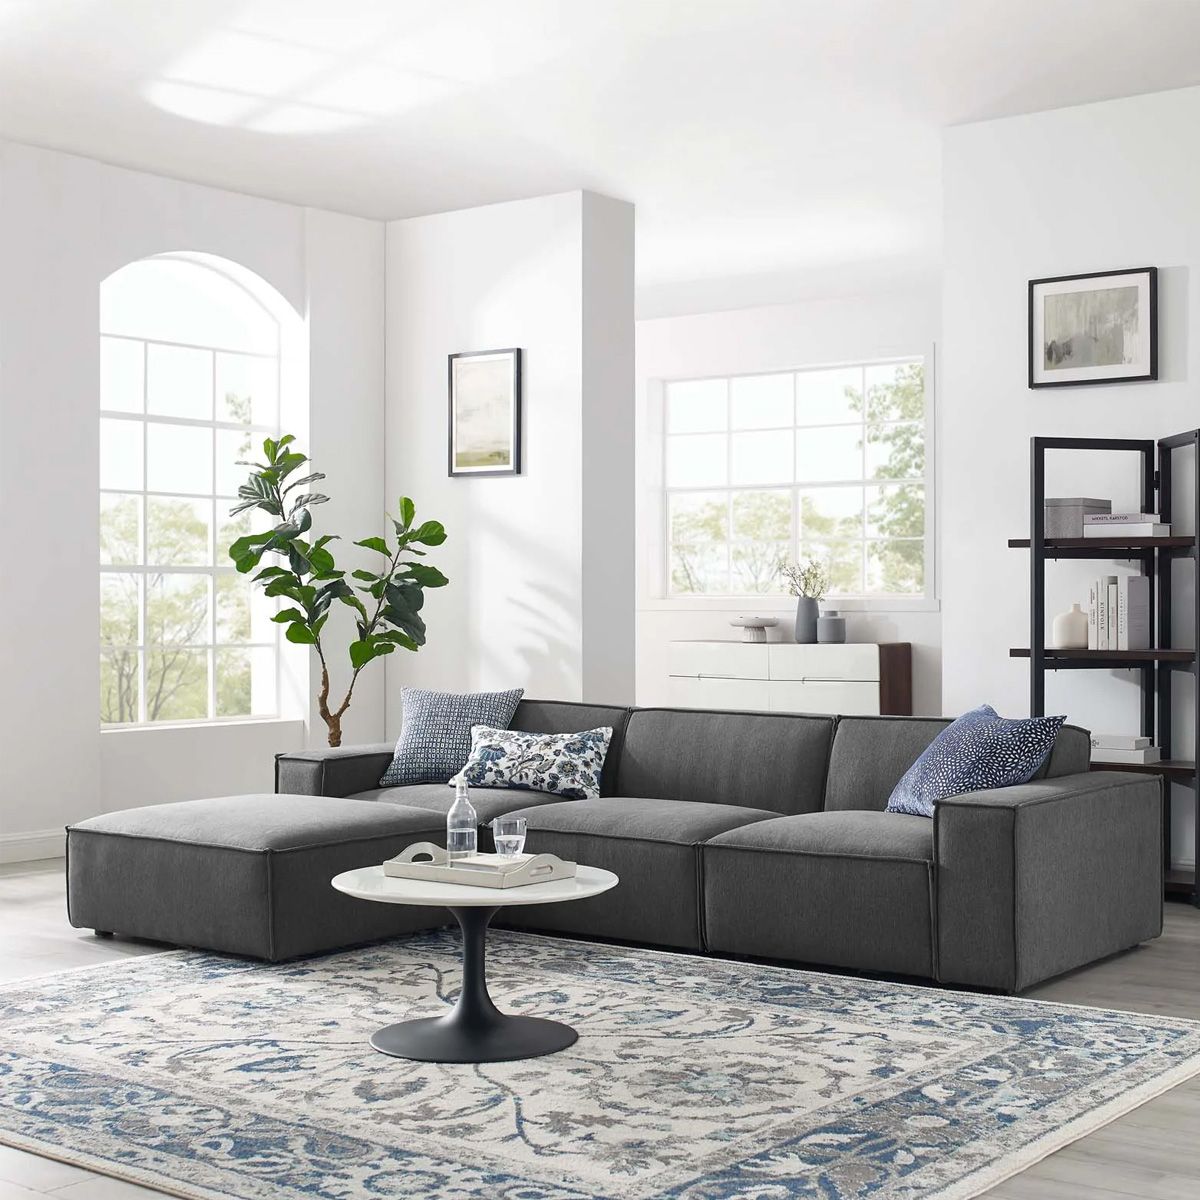 Vitality Sectional Sofa 4 Pieces In Dark Grey From Aed 1949 | Atoz Furniture Inside Dark Gray Sectional Sofas (View 9 of 15)